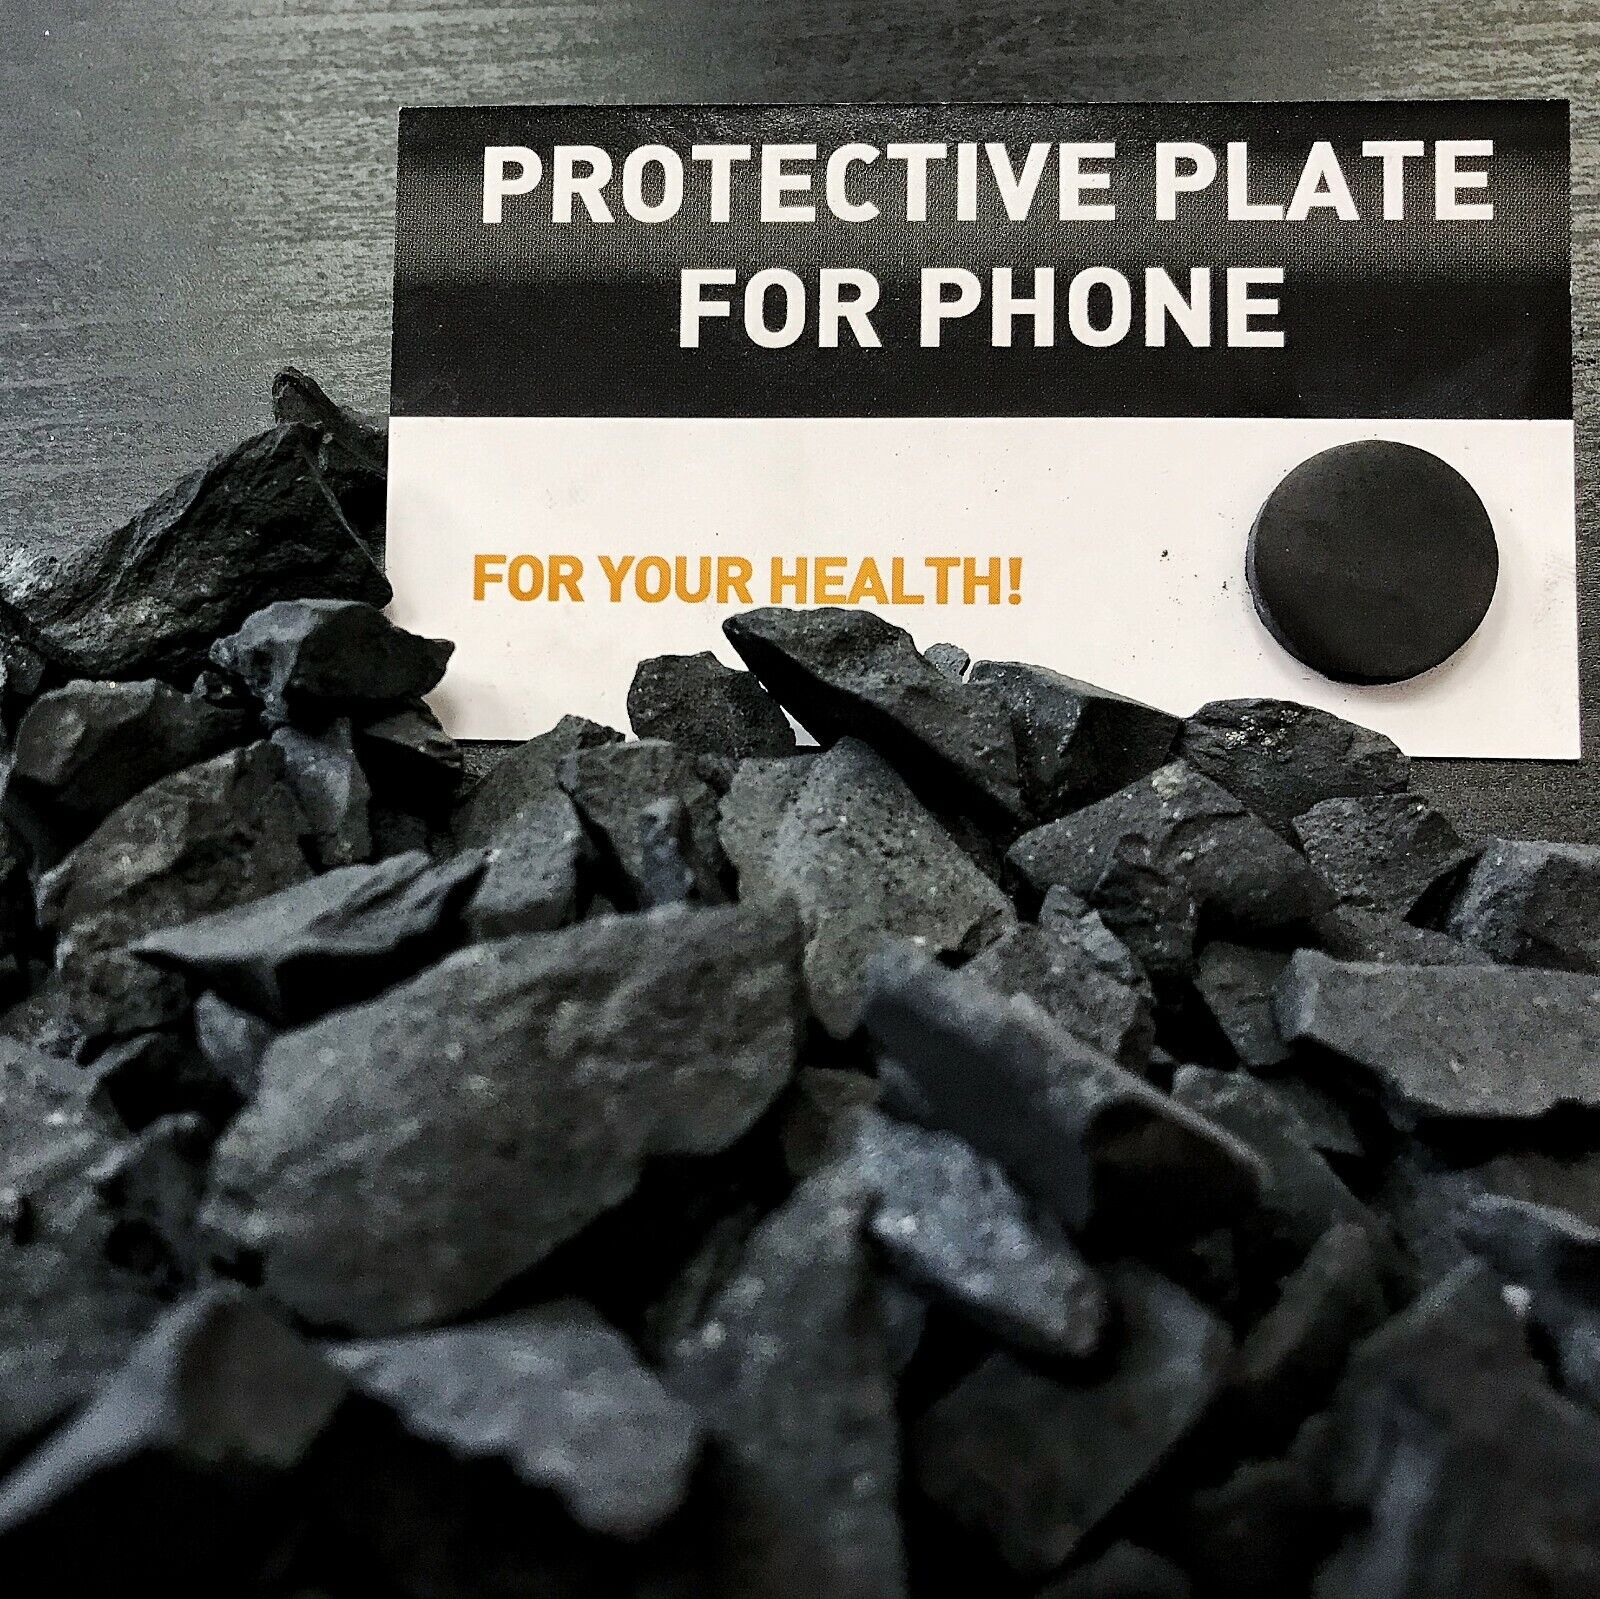 Shungite rough stones for water chips 2lb 0,9kg +GIFT 1 protective plate detox